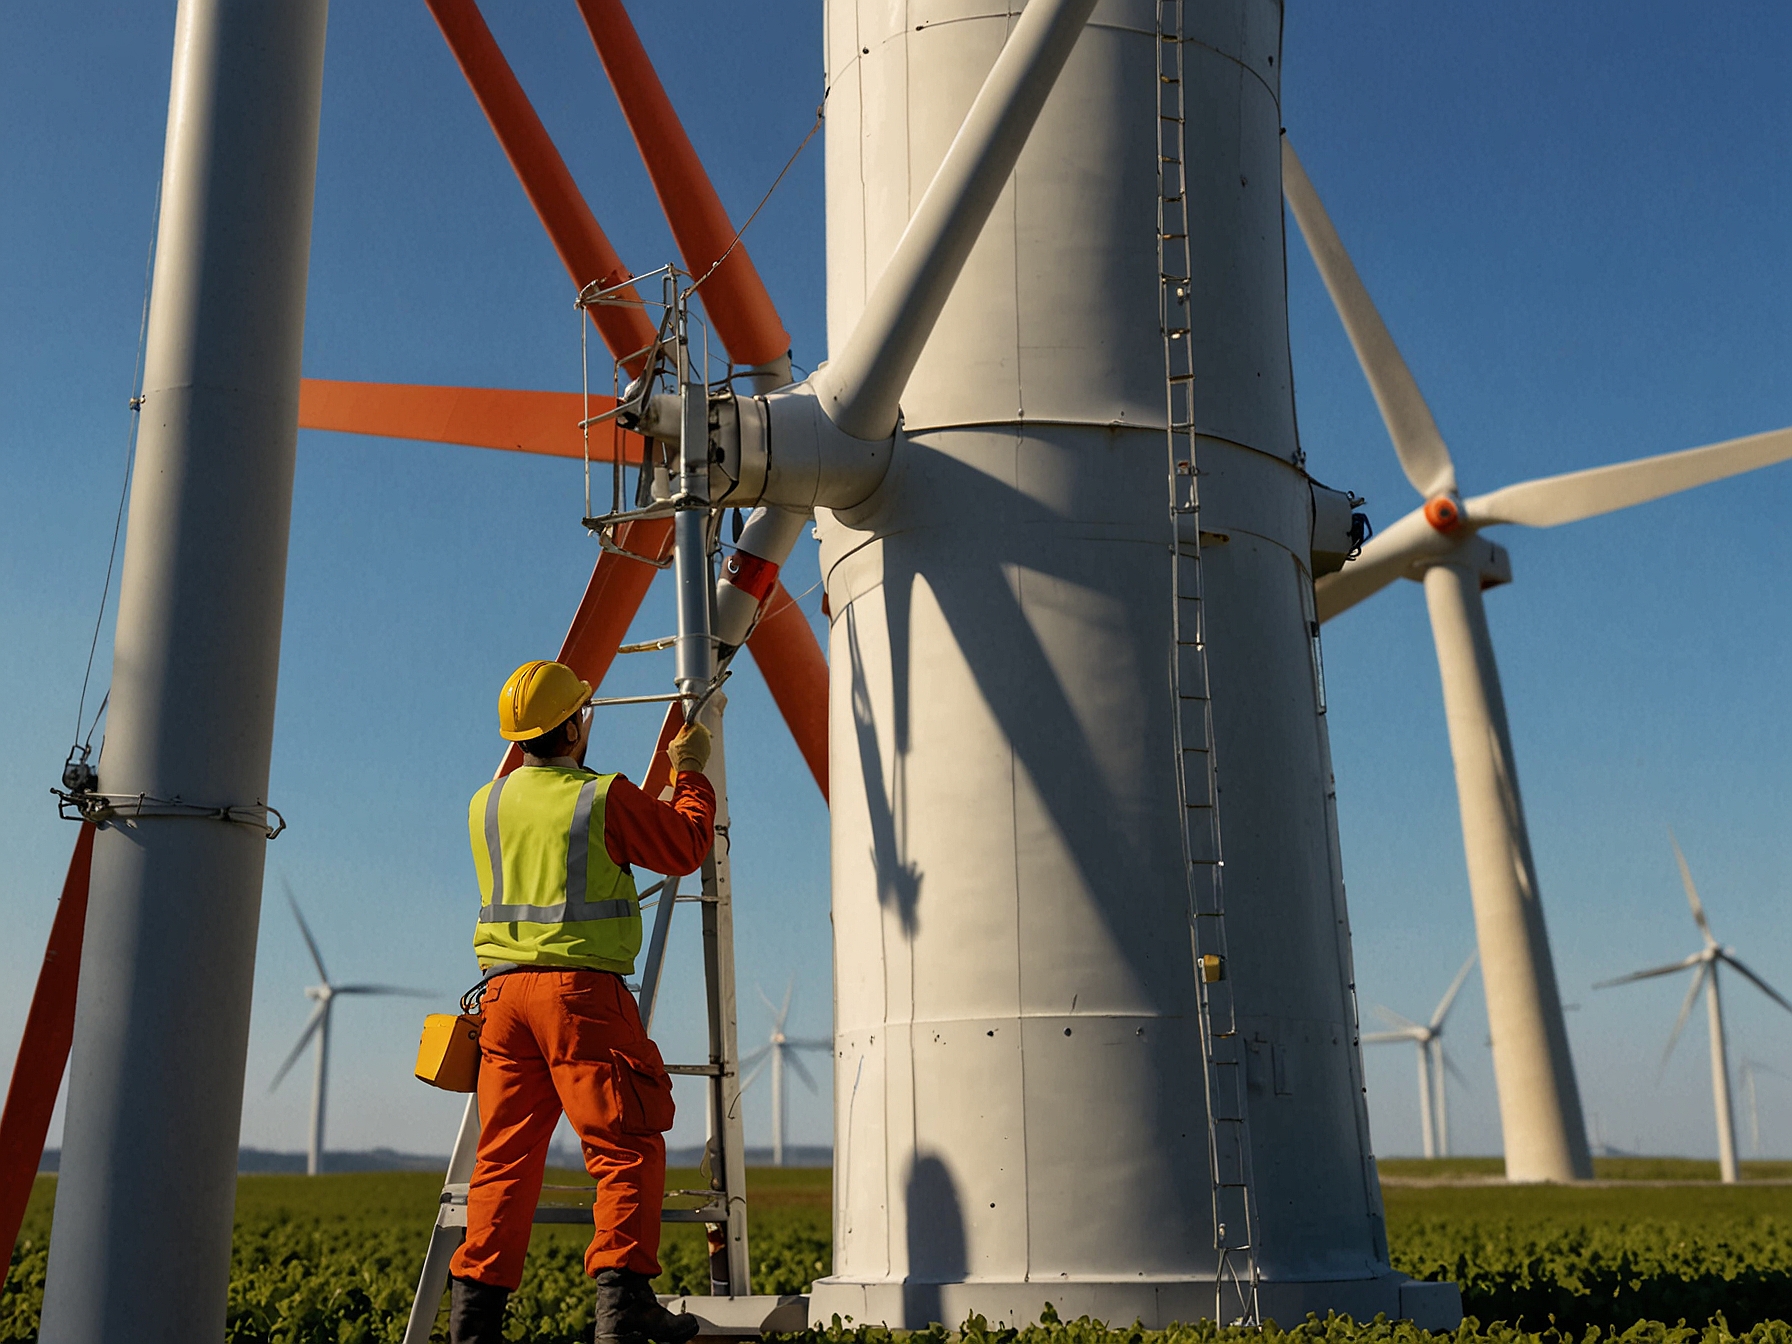 Technicians performing maintenance on one of Vineyard Wind 1’s wind turbines, illustrating the job opportunities and engineering work generated by this massive renewable energy project.